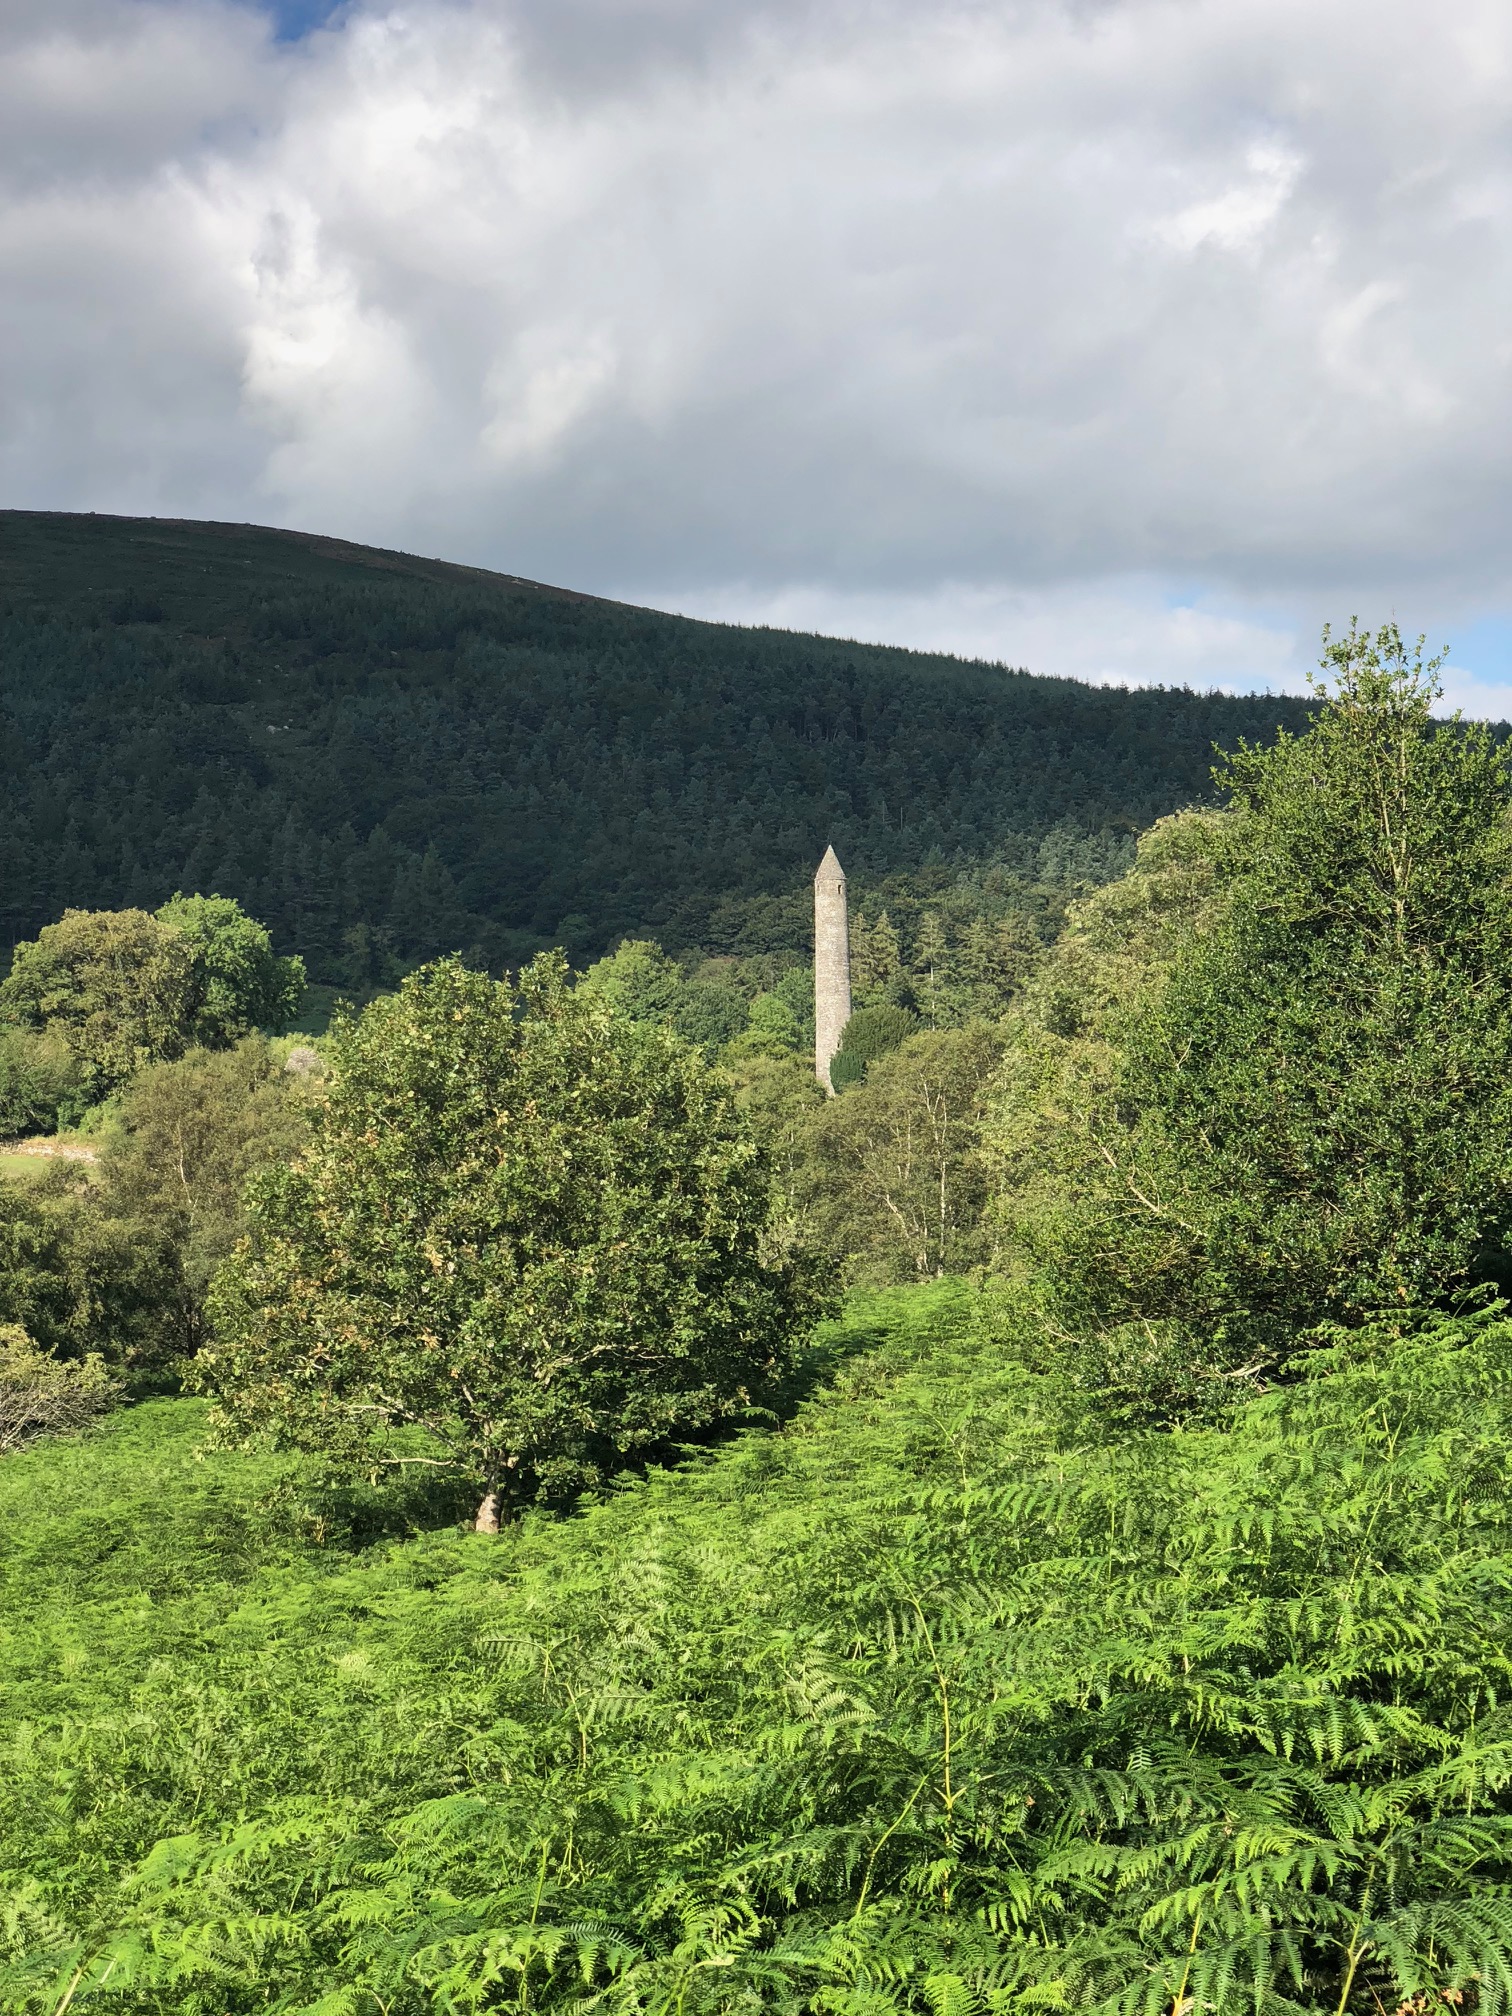 A round stone tower with a conical roof sticks out above the trees, before a dark hills.